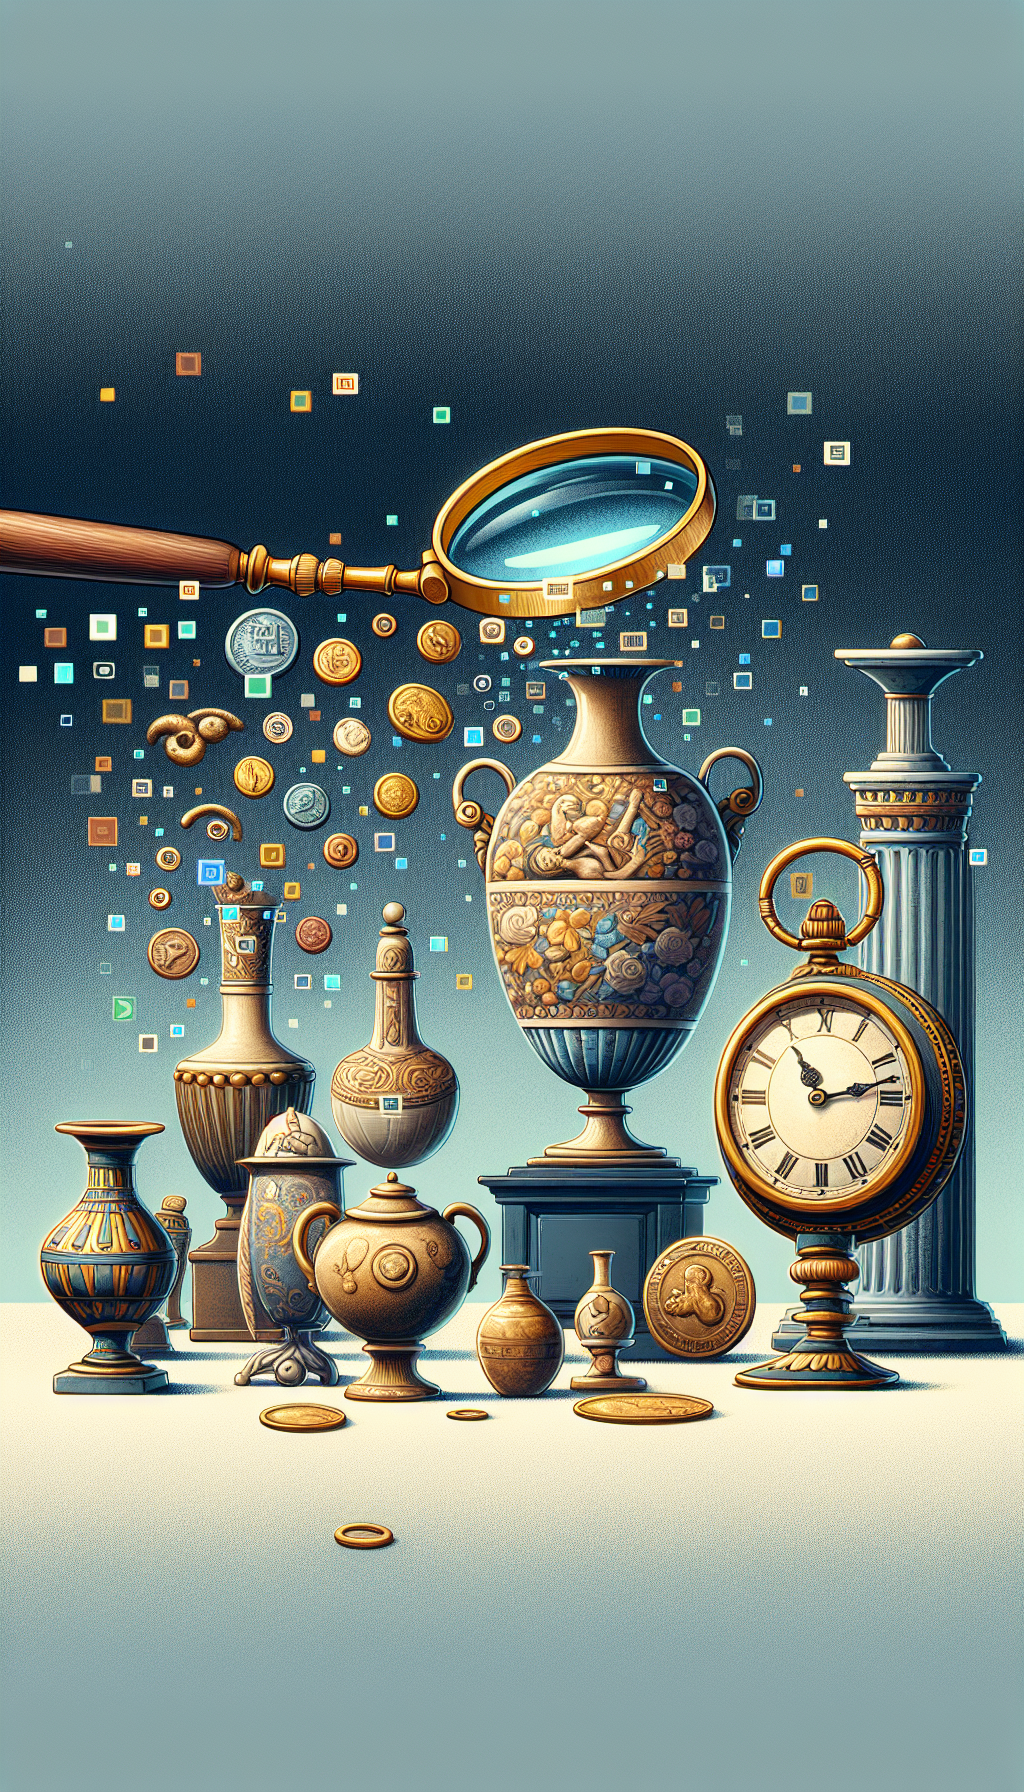 A whimsical illustration featuring a vintage magnifying glass peering over an array of antiquities – classic vases, ornate clocks, and ancient coins, which transition into digital pixels and morph into app icons. Captured mid-discovery, the scene suggests these traditional heirlooms revealing their secrets and value through the transformative power of modern antique identification apps.